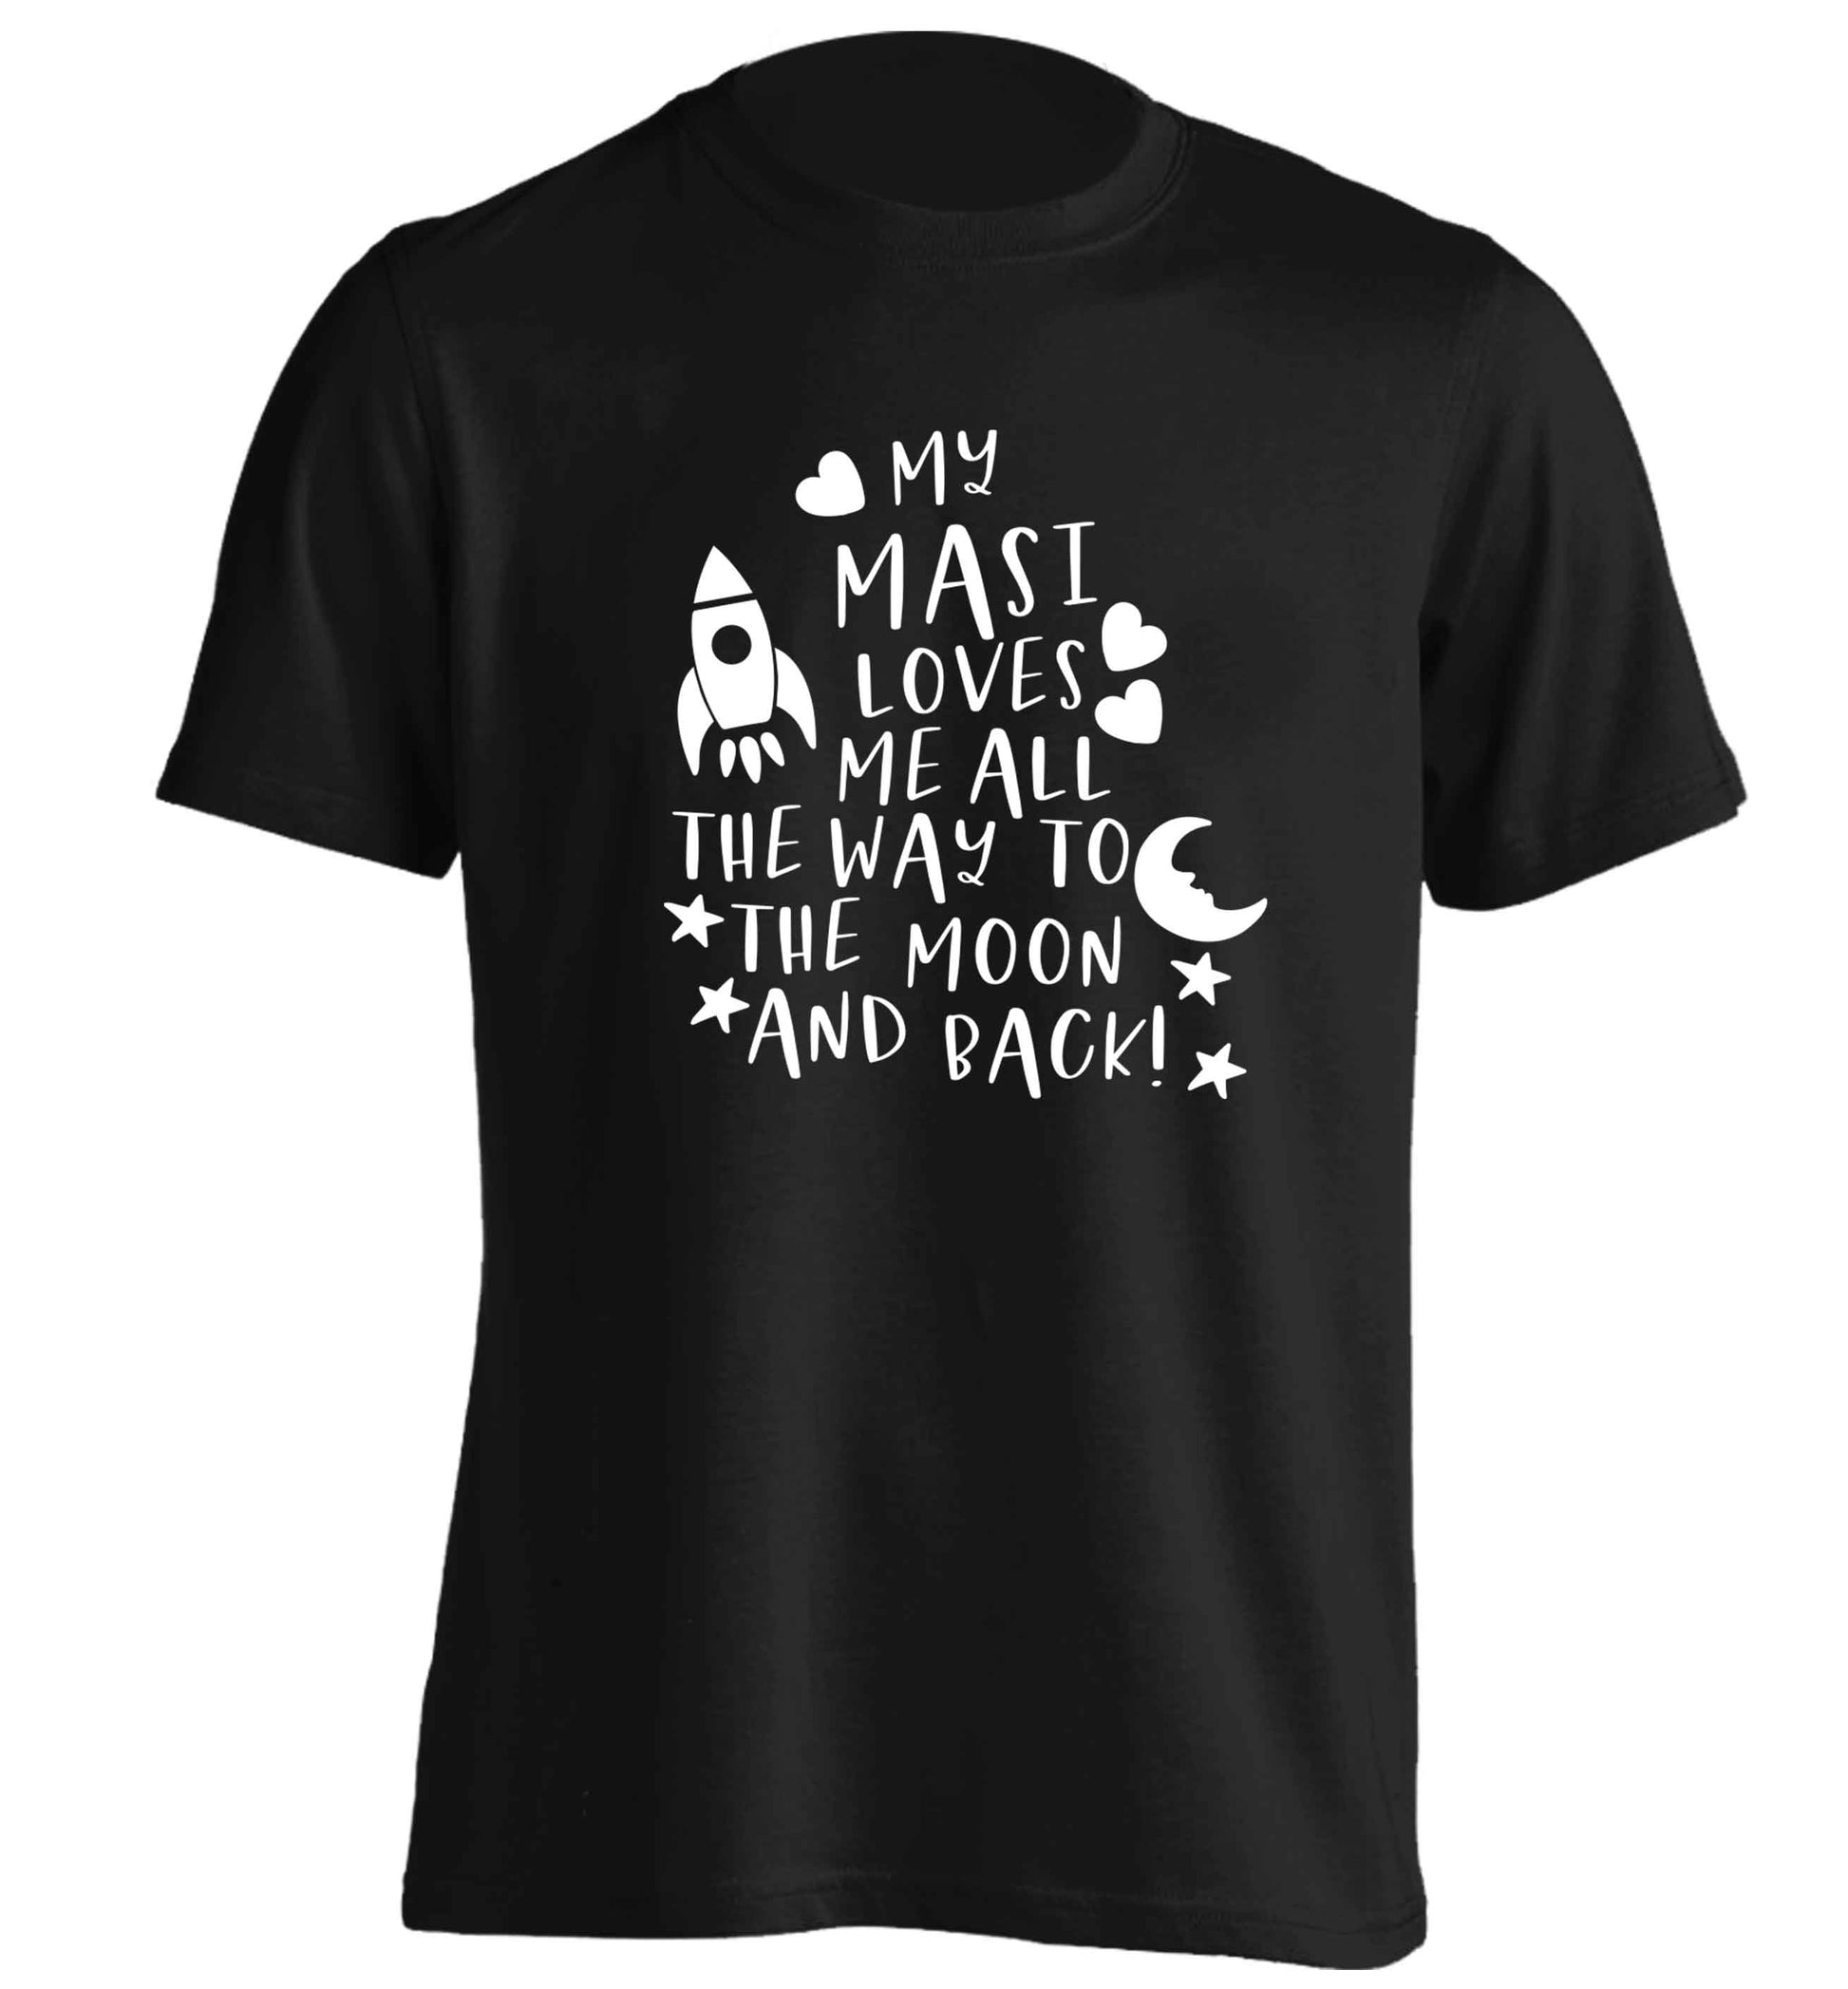 My masi loves me all the way to the moon and back adults unisex black Tshirt 2XL